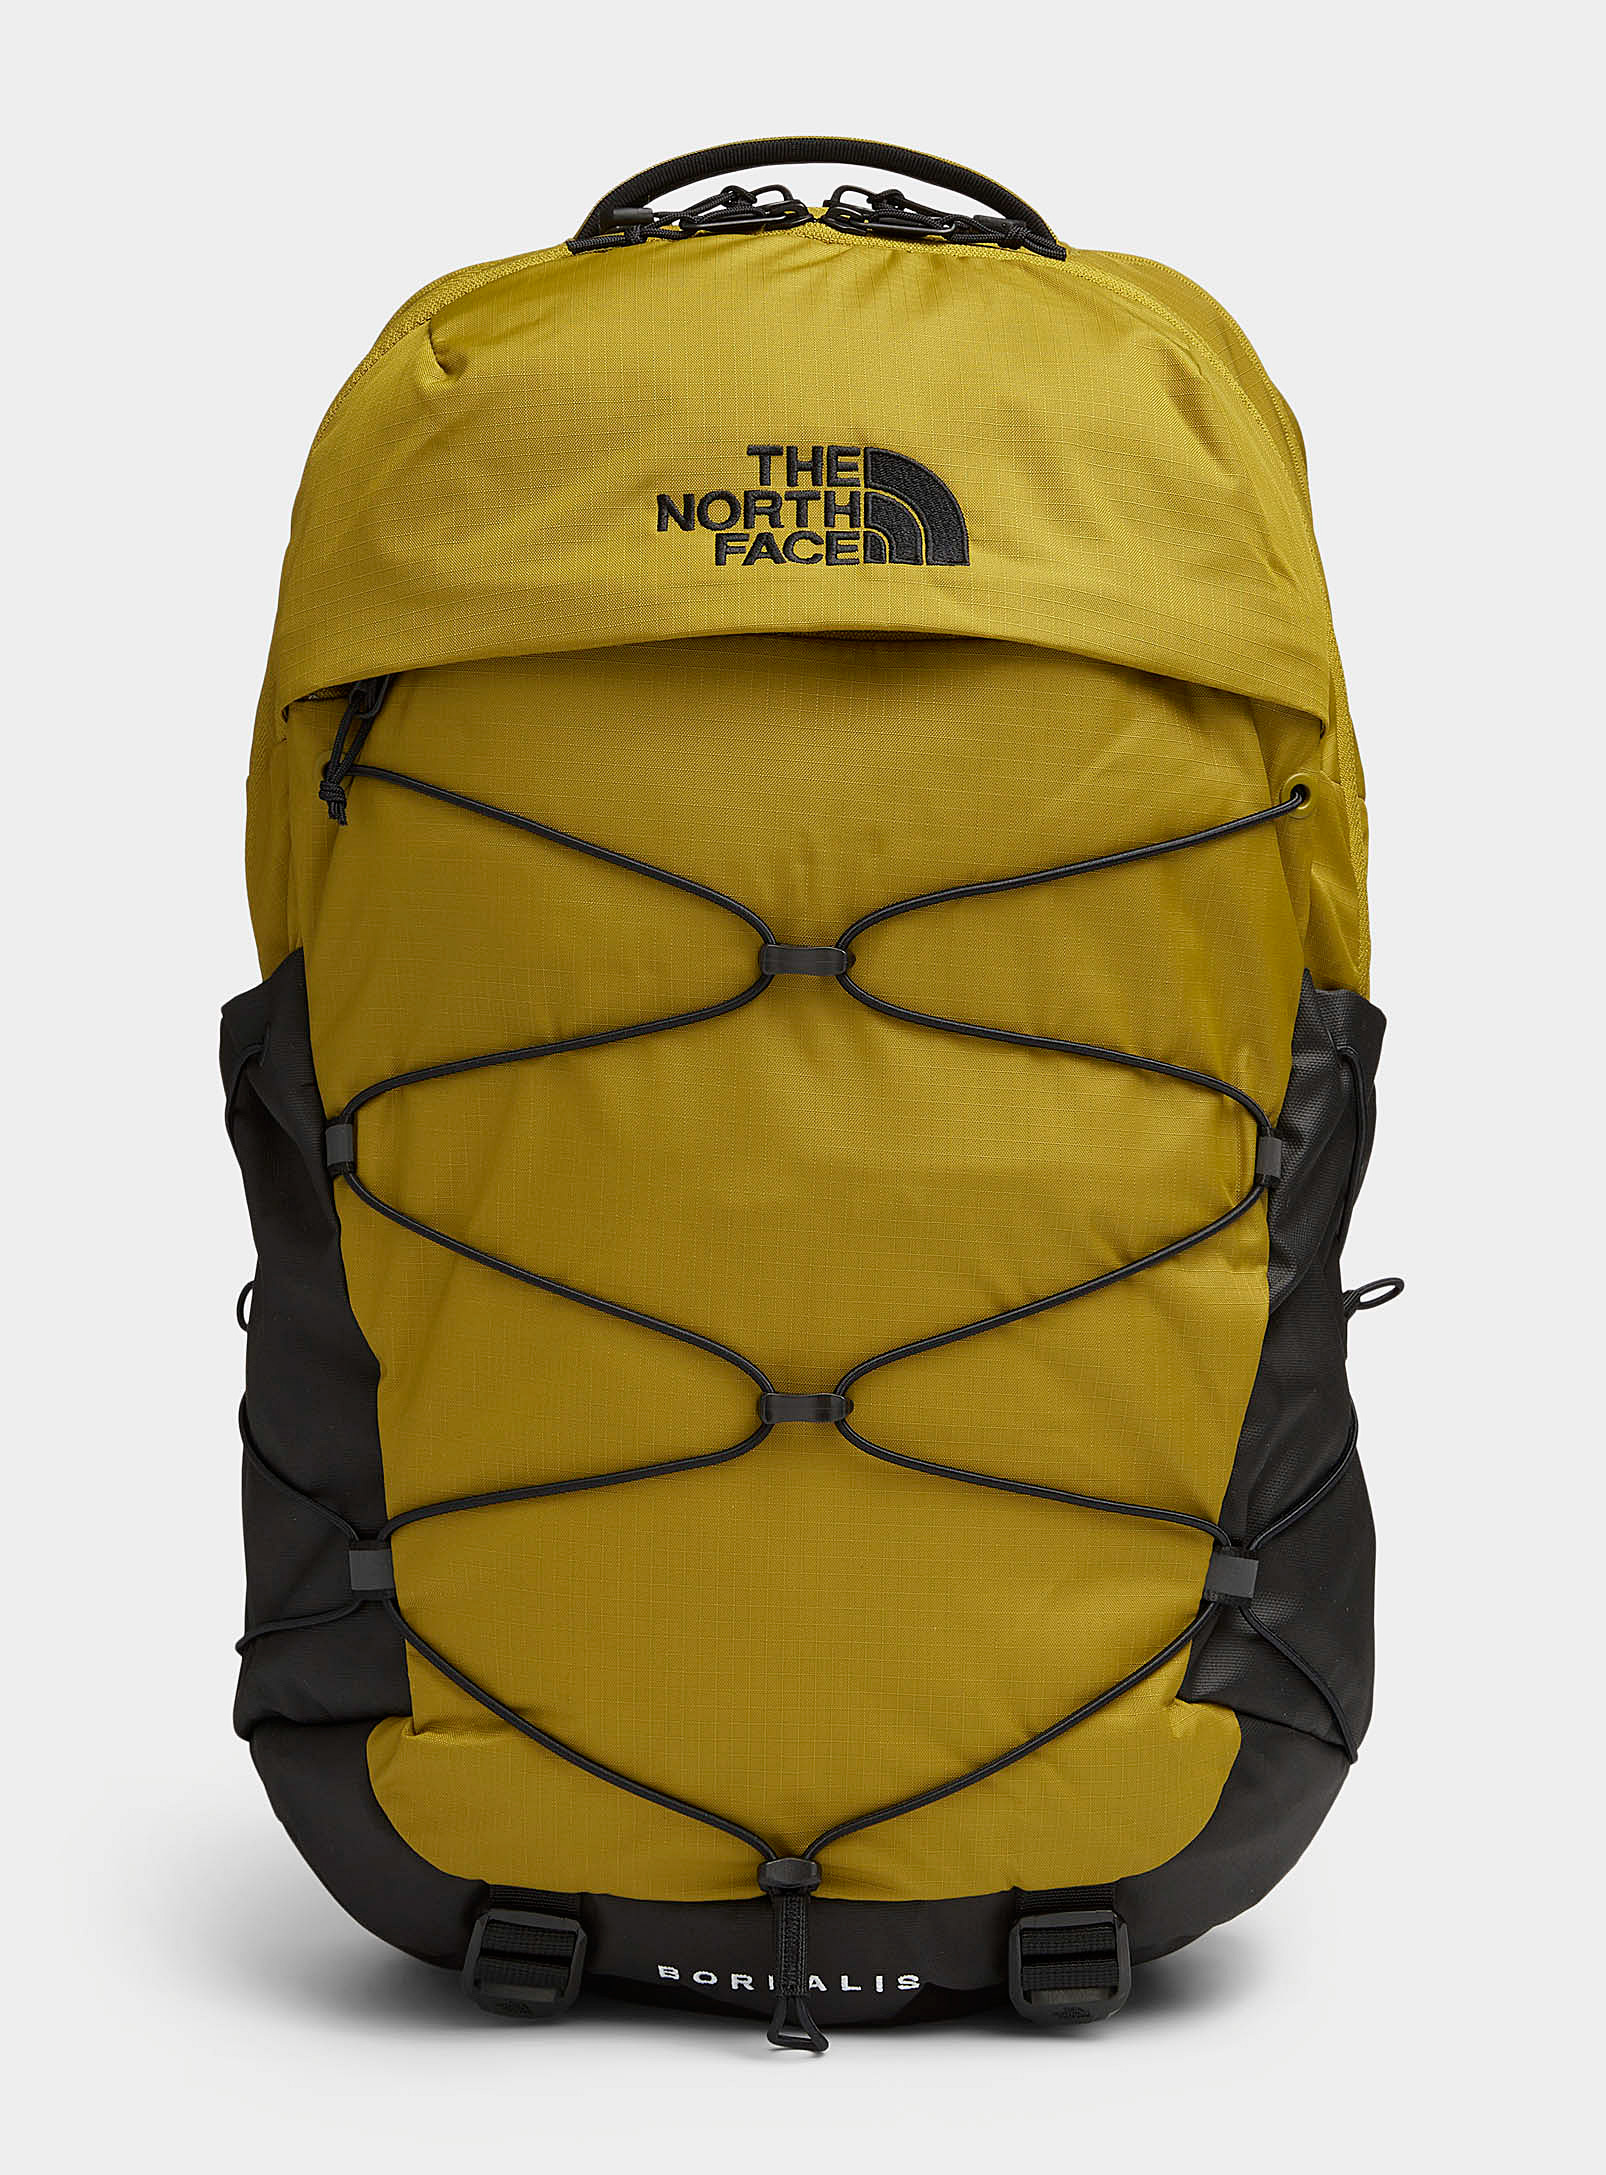 The North Face Borealis Backpack In Burgundy | ModeSens